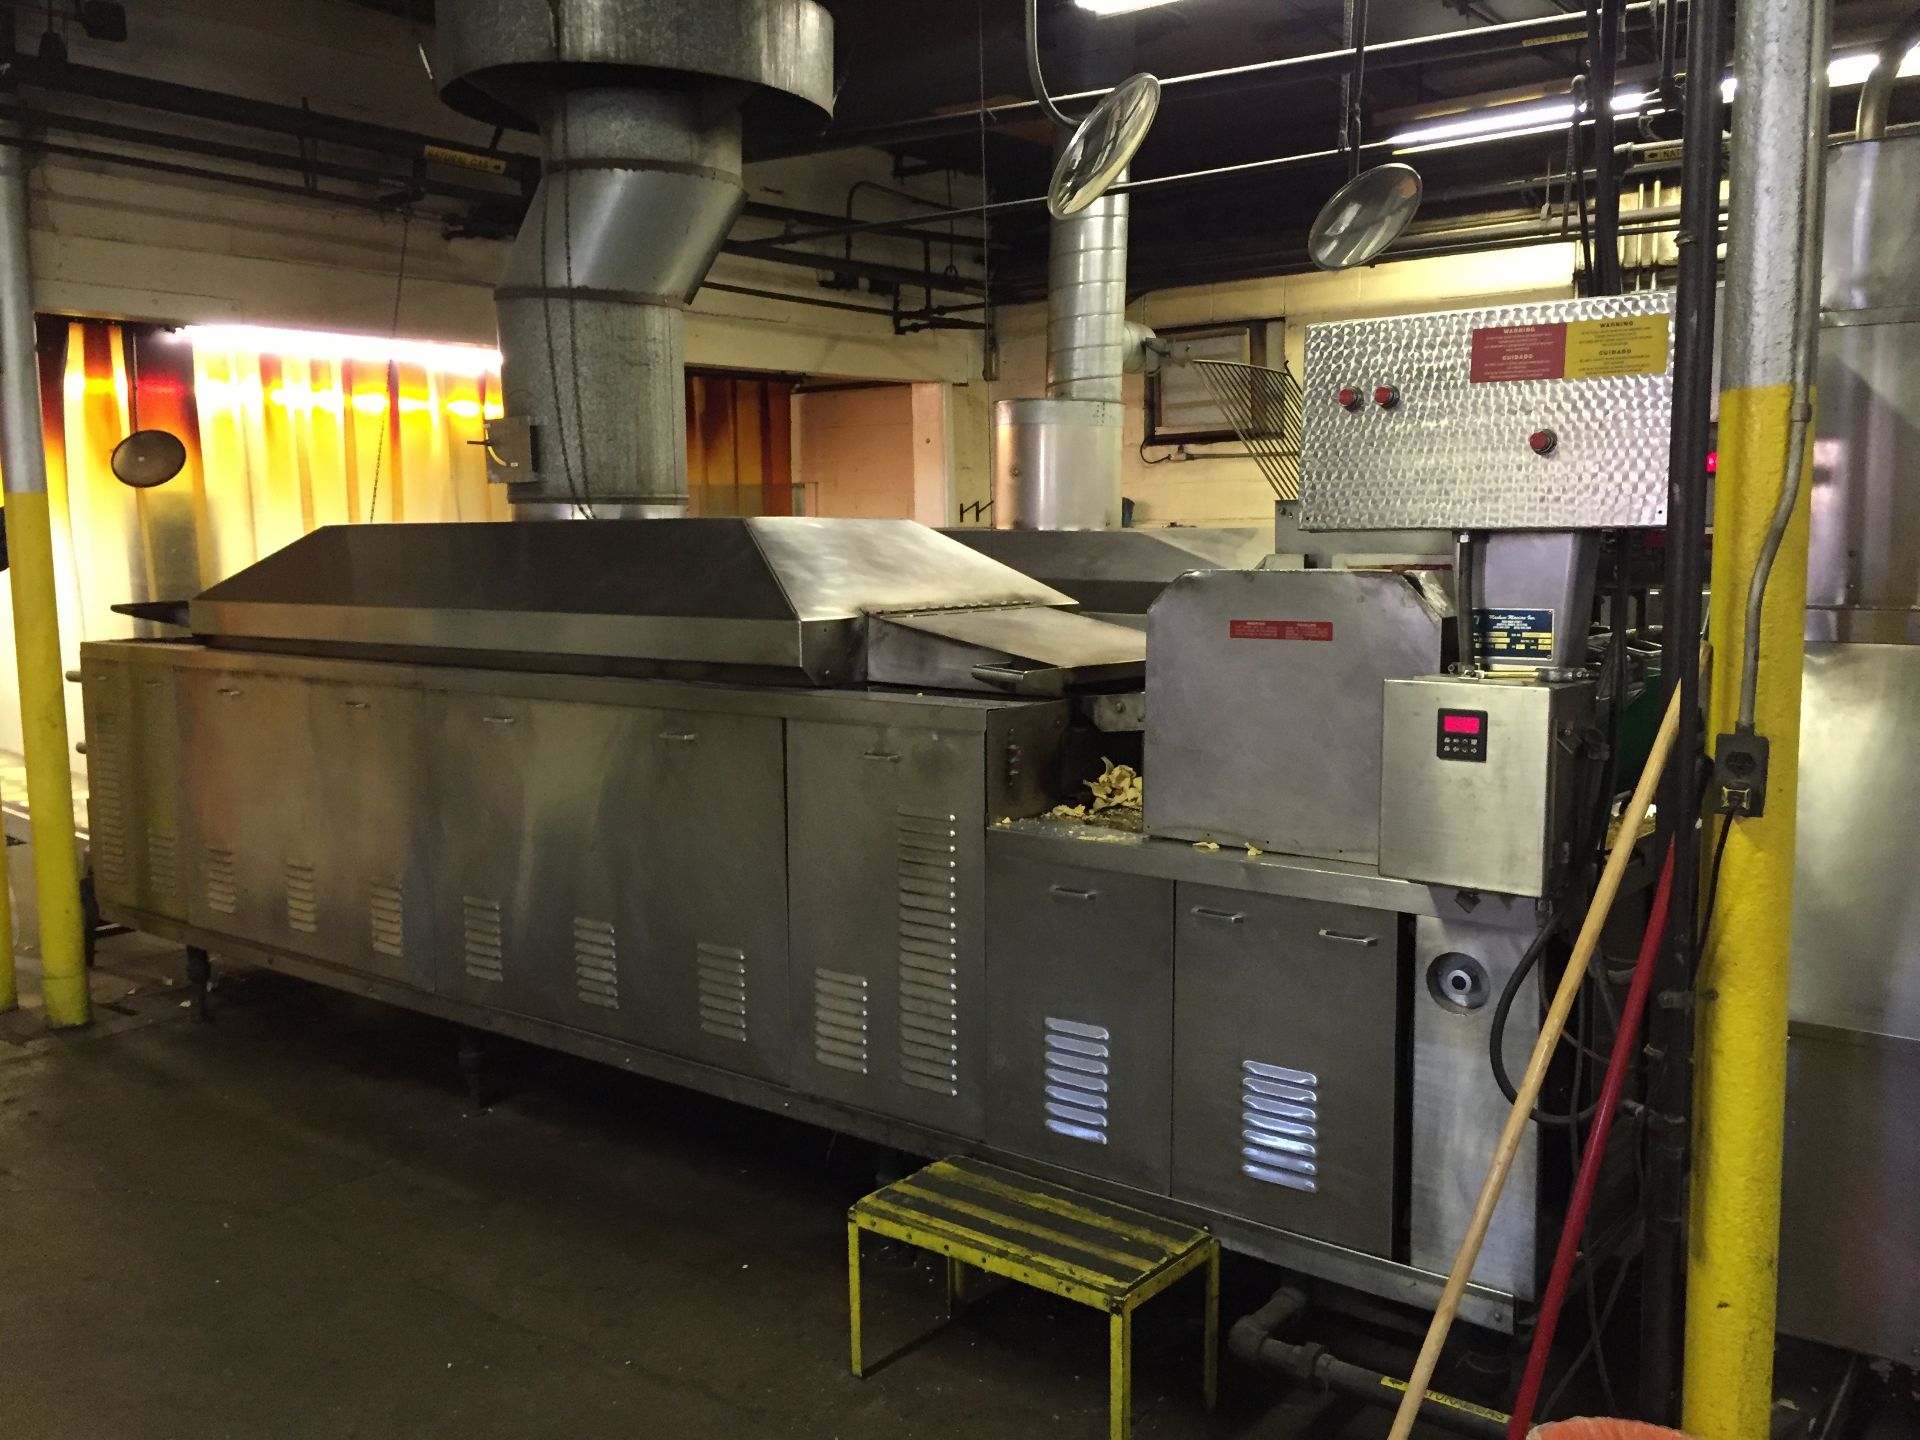 Machine Masters Corn Oven with Press Model #MMCT012198, Located in: St. Mary's, PA